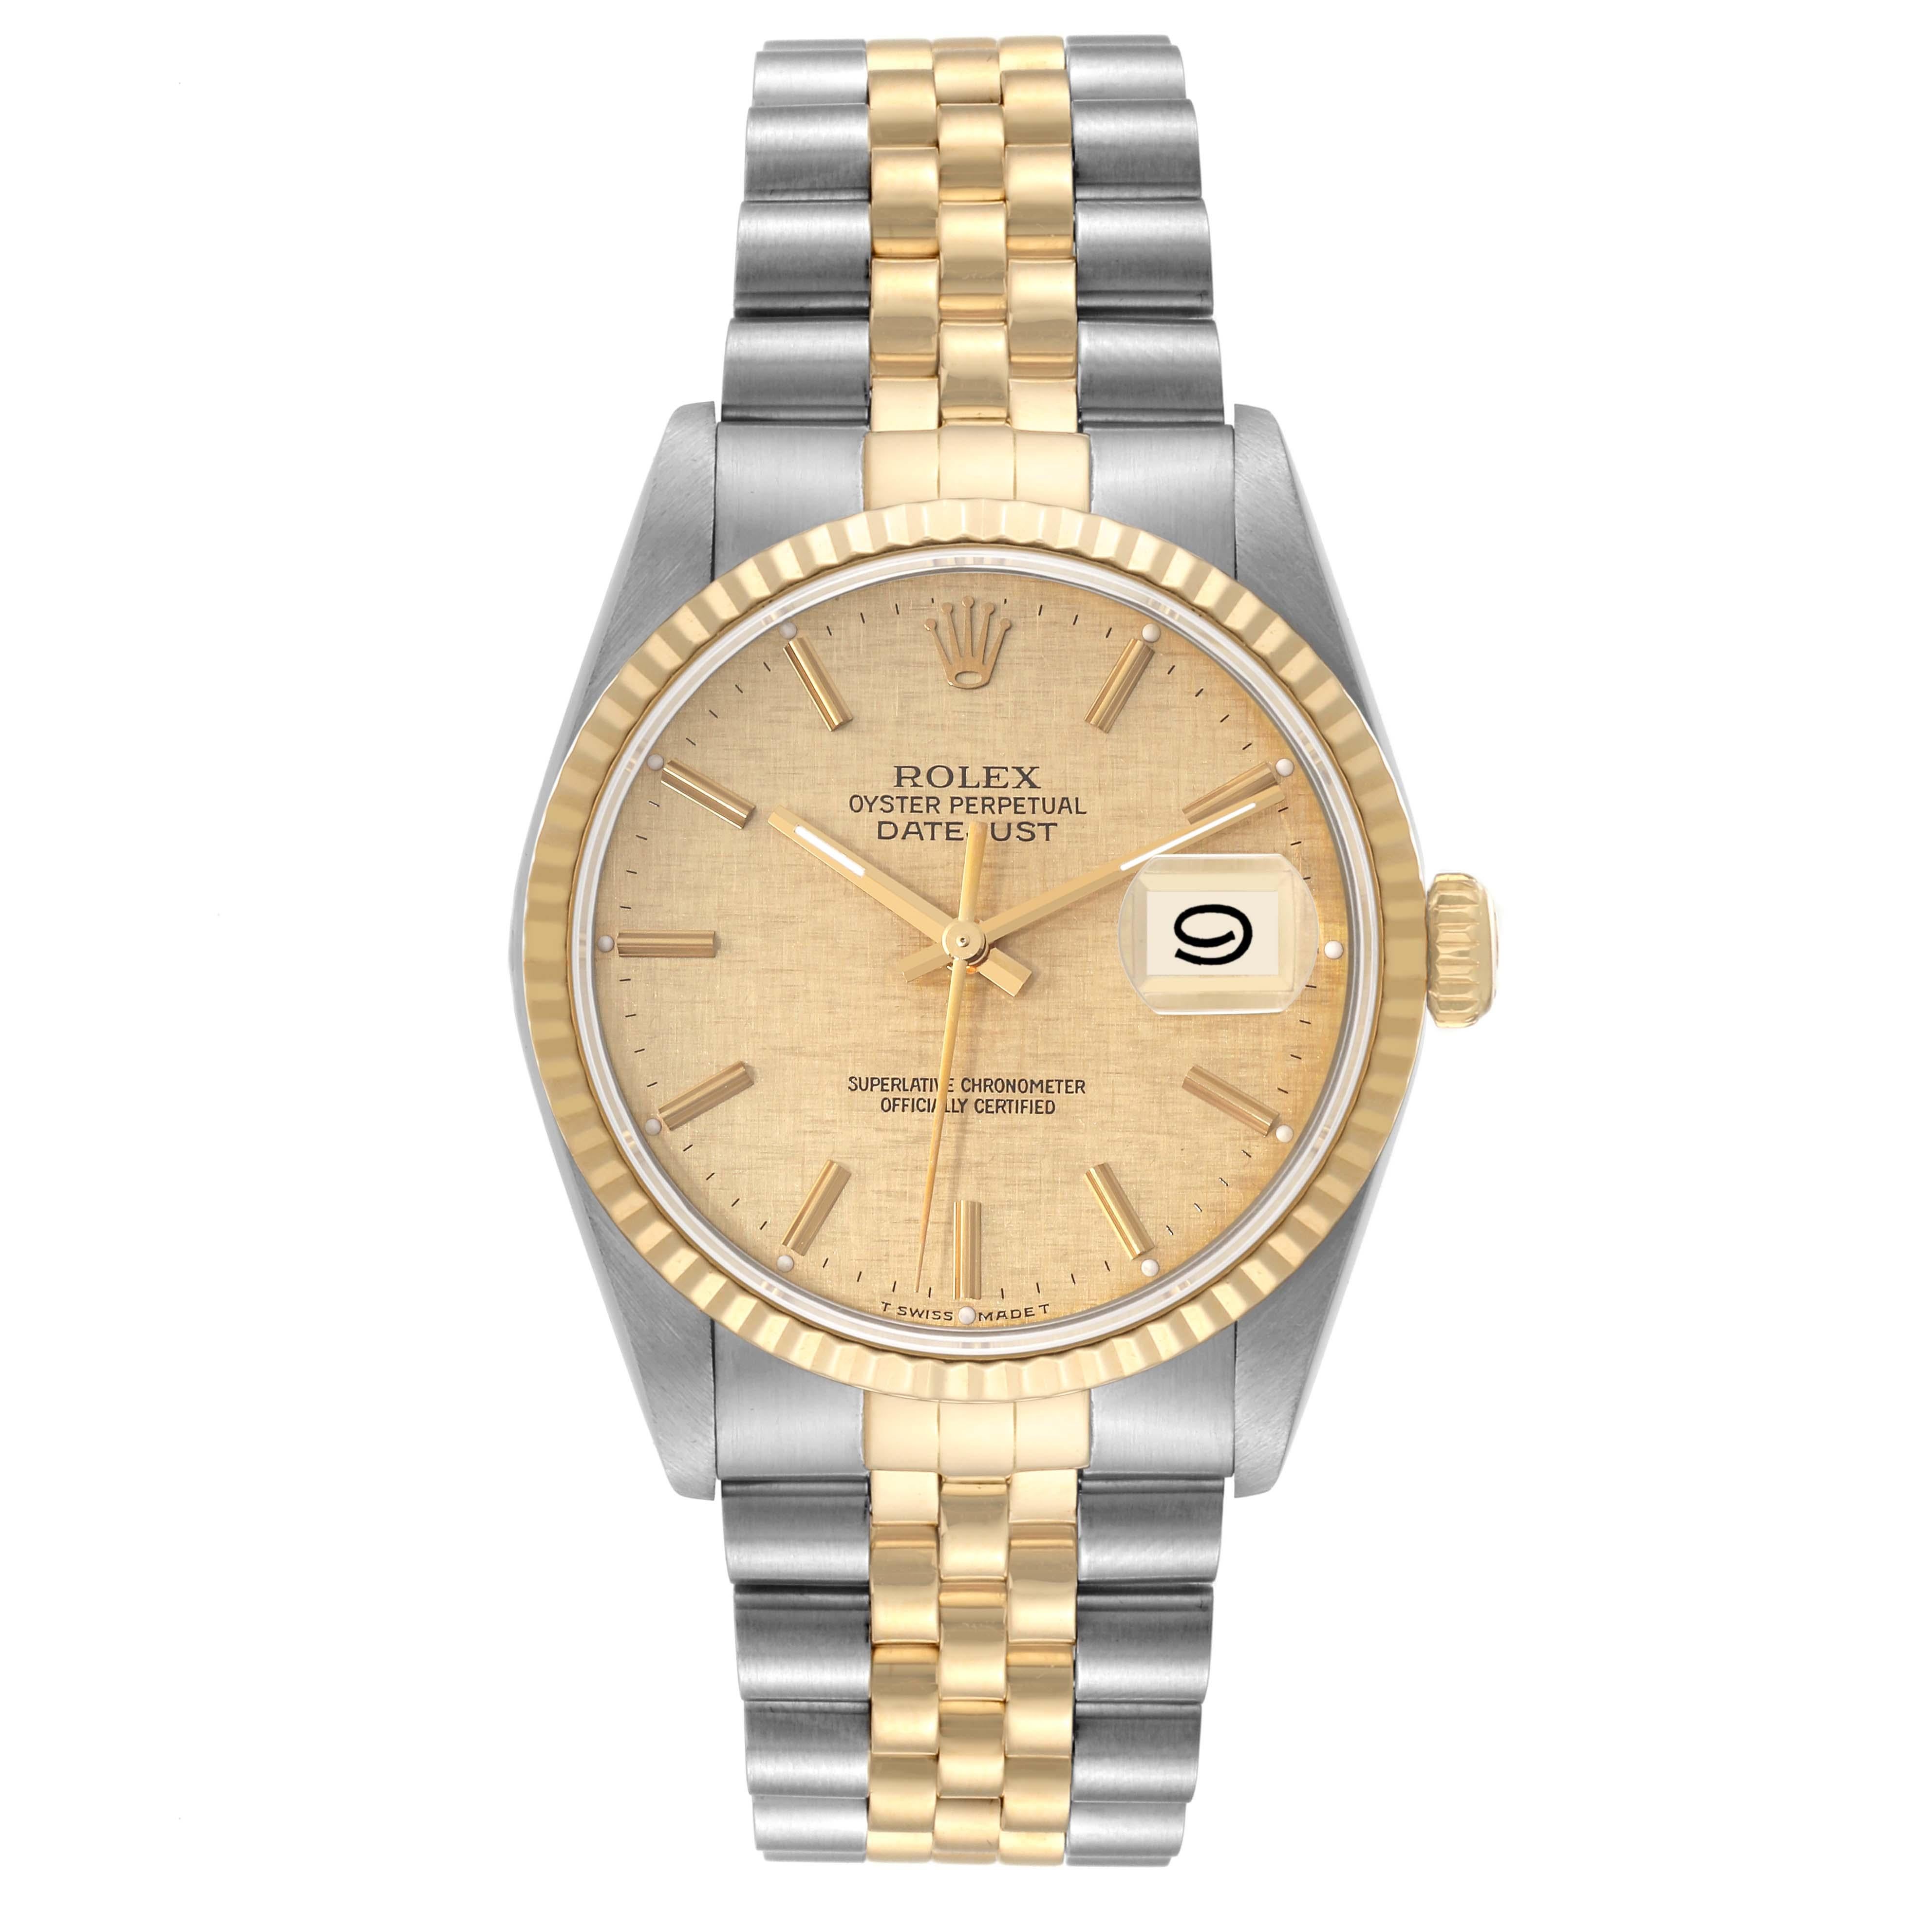 Rolex Datejust Steel Yellow Gold Champagne Linen Dial Mens Watch 16233. Officially certified chronometer automatic self-winding movement. Stainless steel case 36 mm in diameter.  Rolex logo on an 18K yellow gold crown. 18k yellow gold fluted bezel.